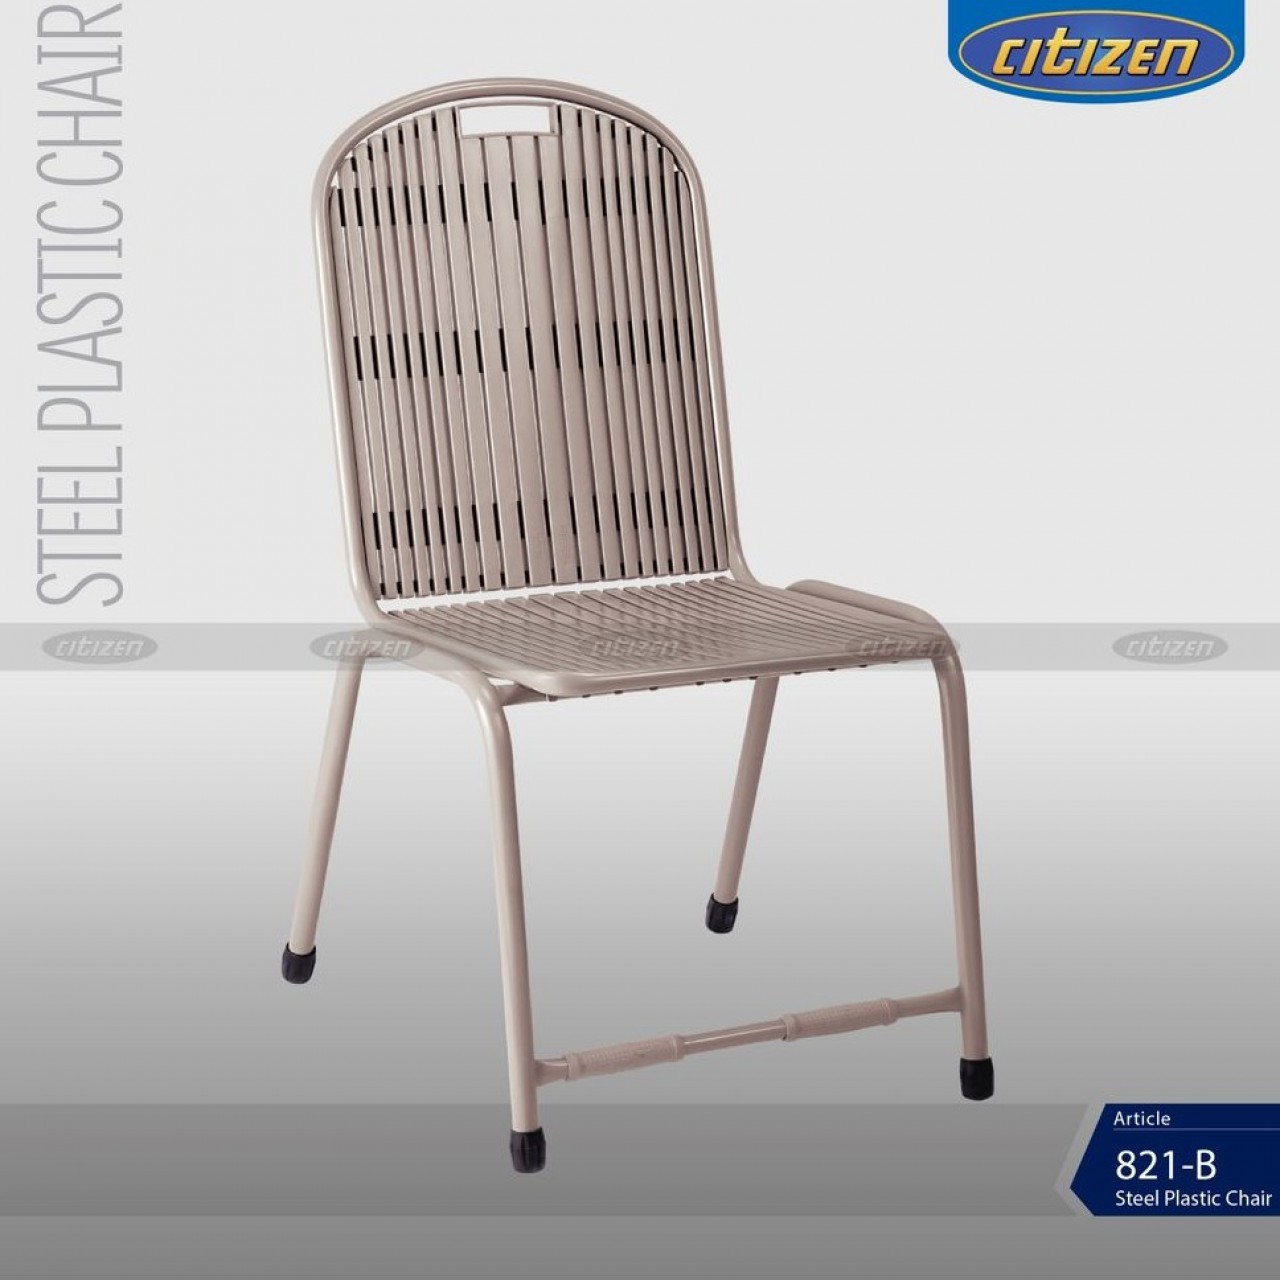 Citizen 821-B Steel & Plastic Chair Without Arms